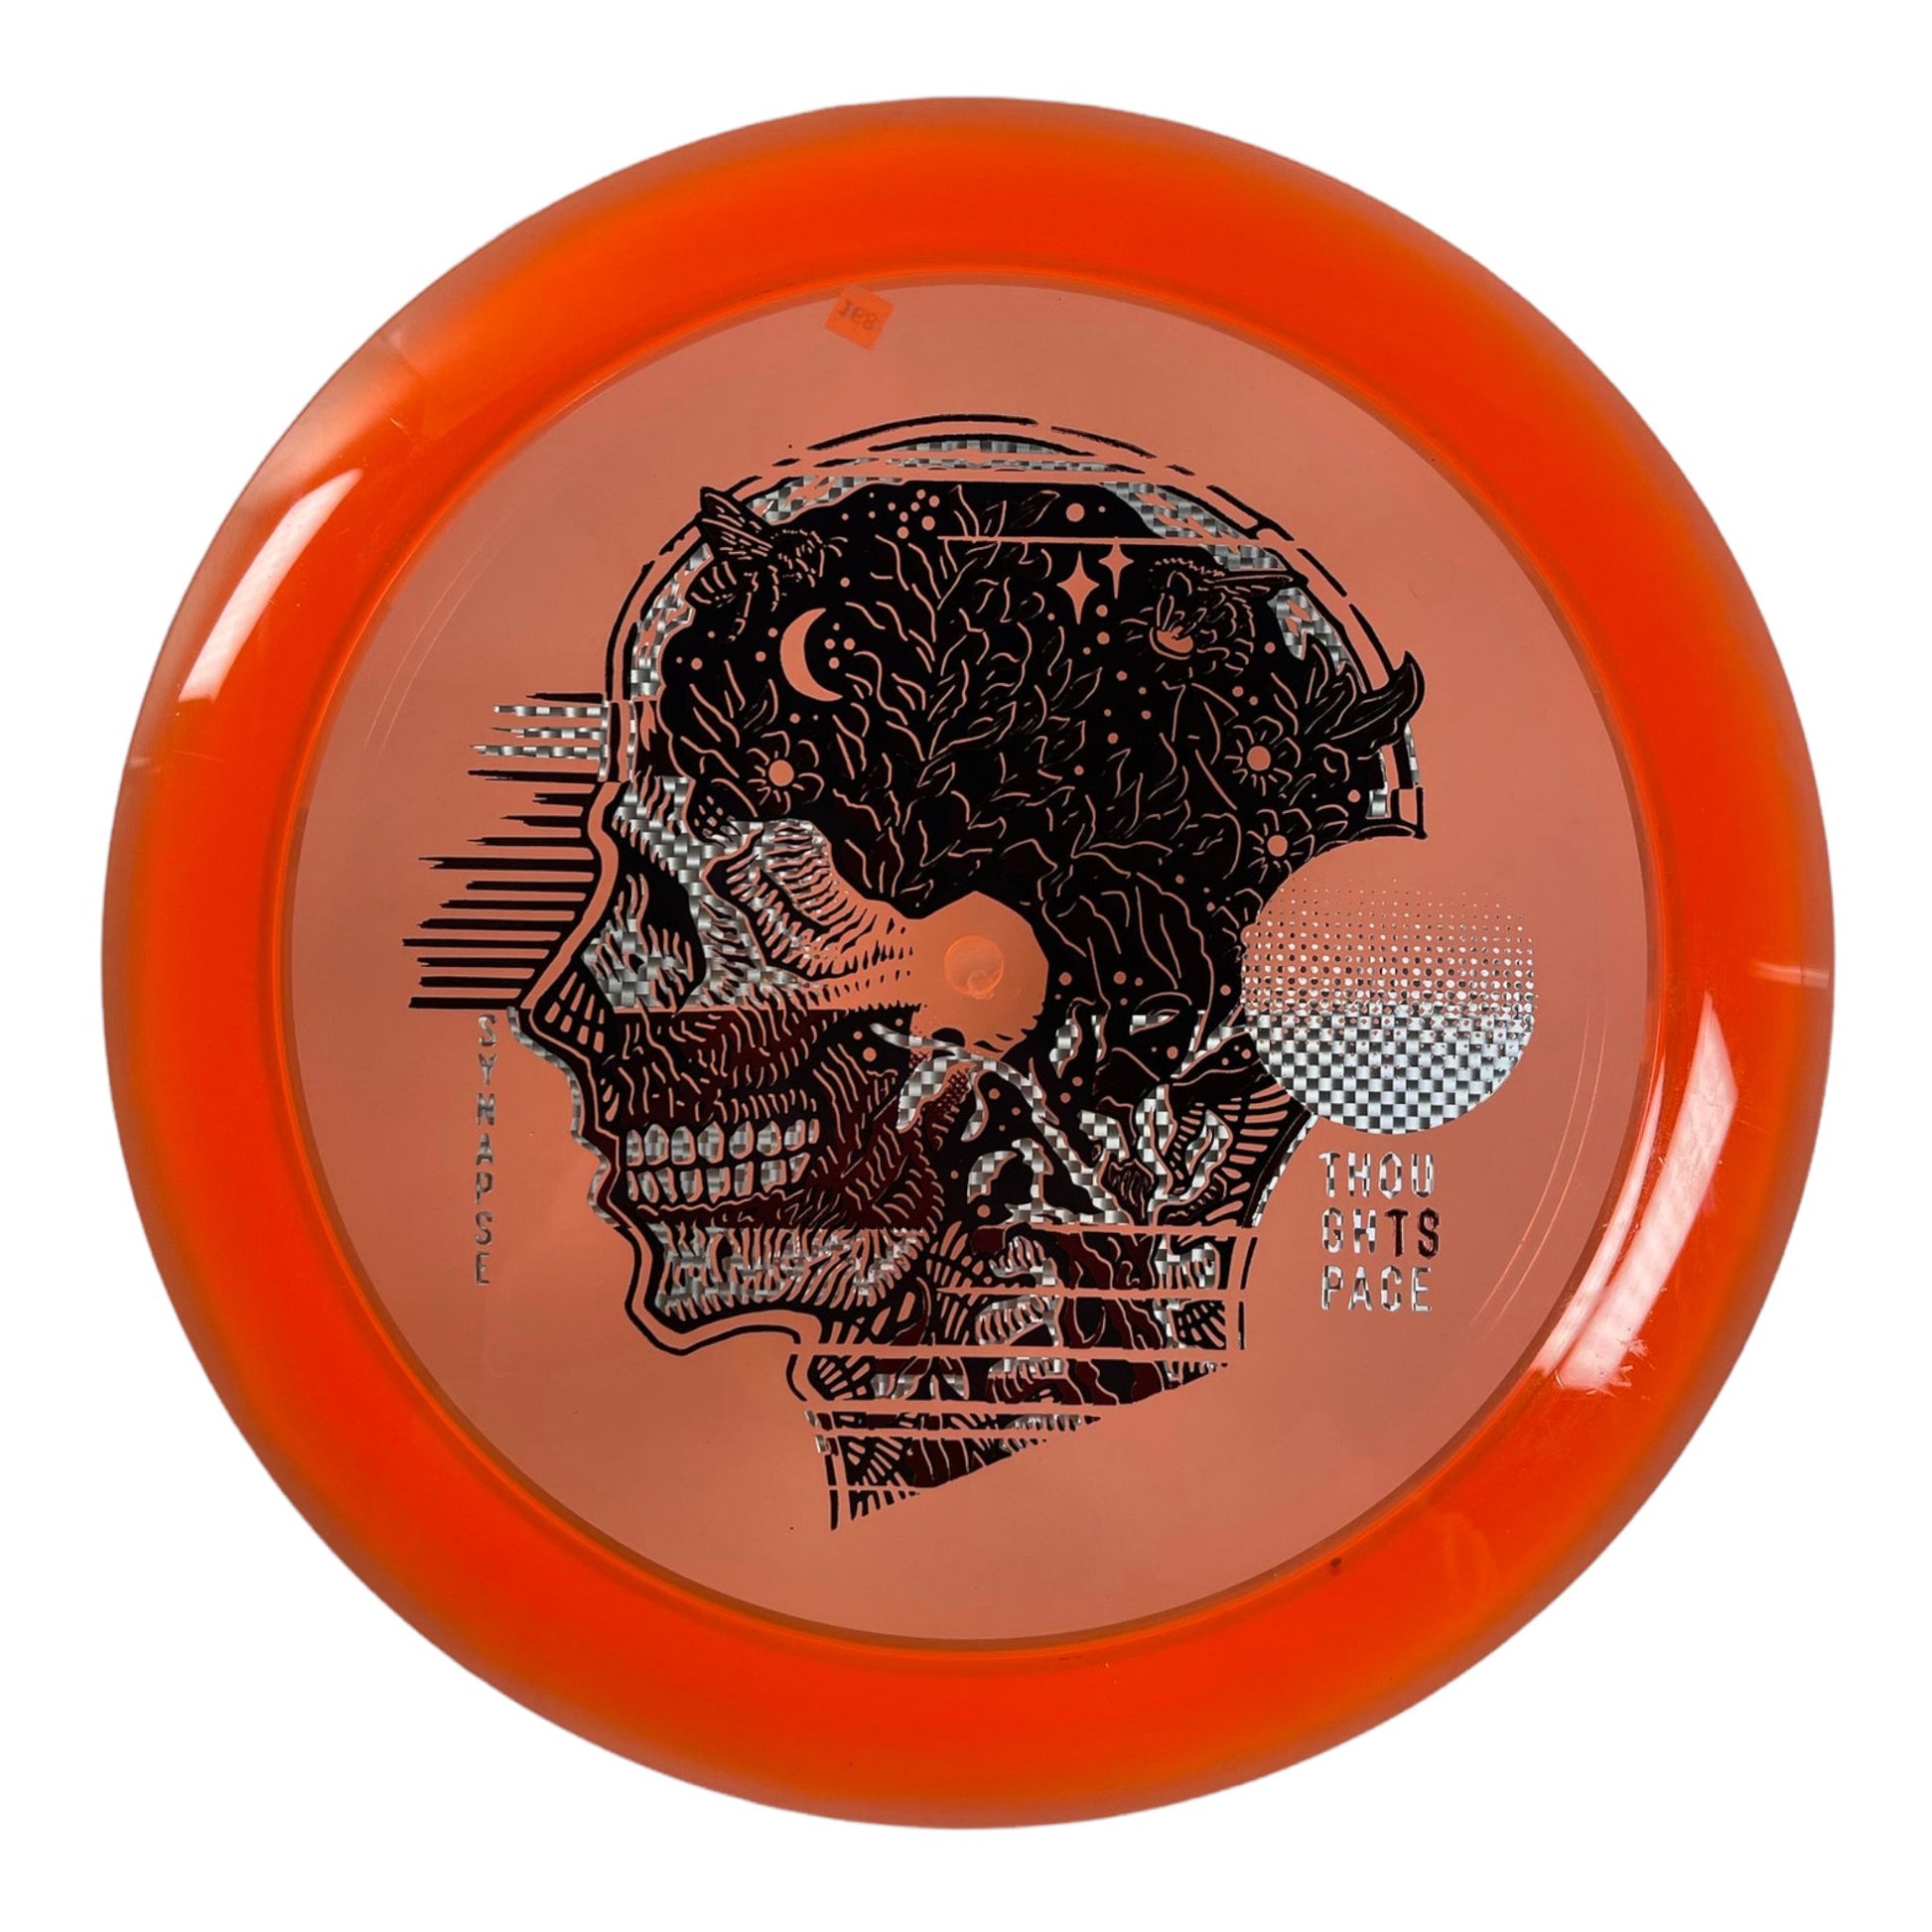 Thought Space Athletics Synapse | Ethos | Orange/Brown 168g Disc Golf